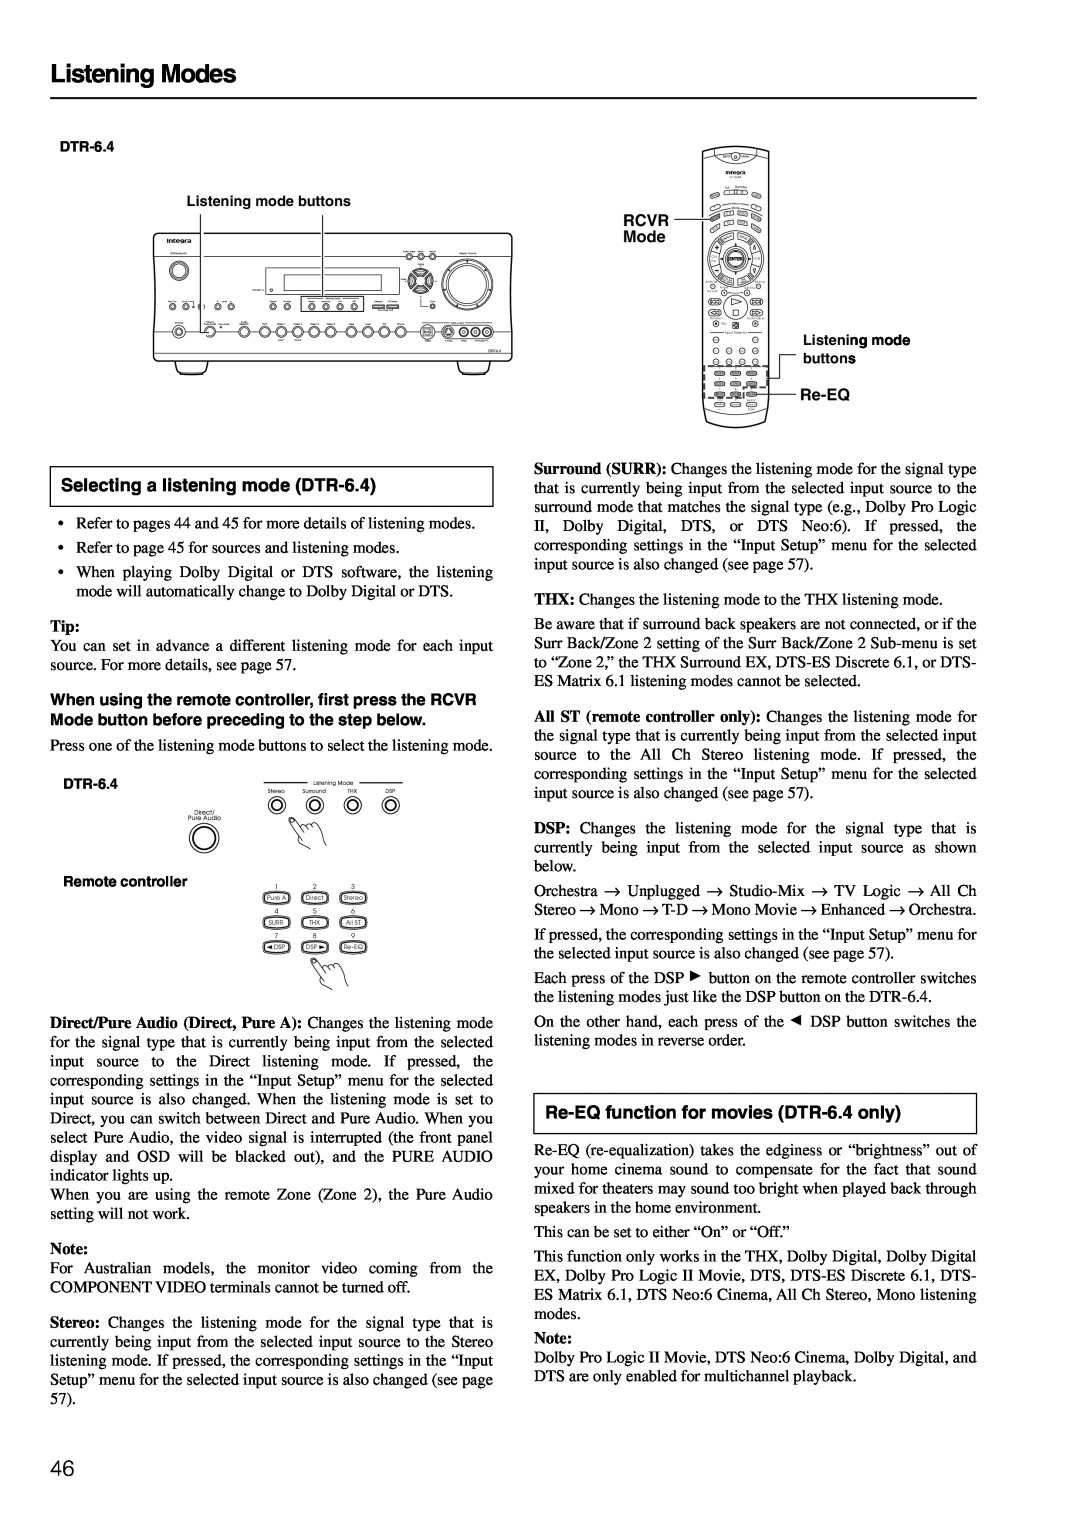 Integra DTR-6.4/5.4 Selecting a listening mode DTR-6.4, Re-EQfunction for movies DTR-6.4only, Listening Modes 